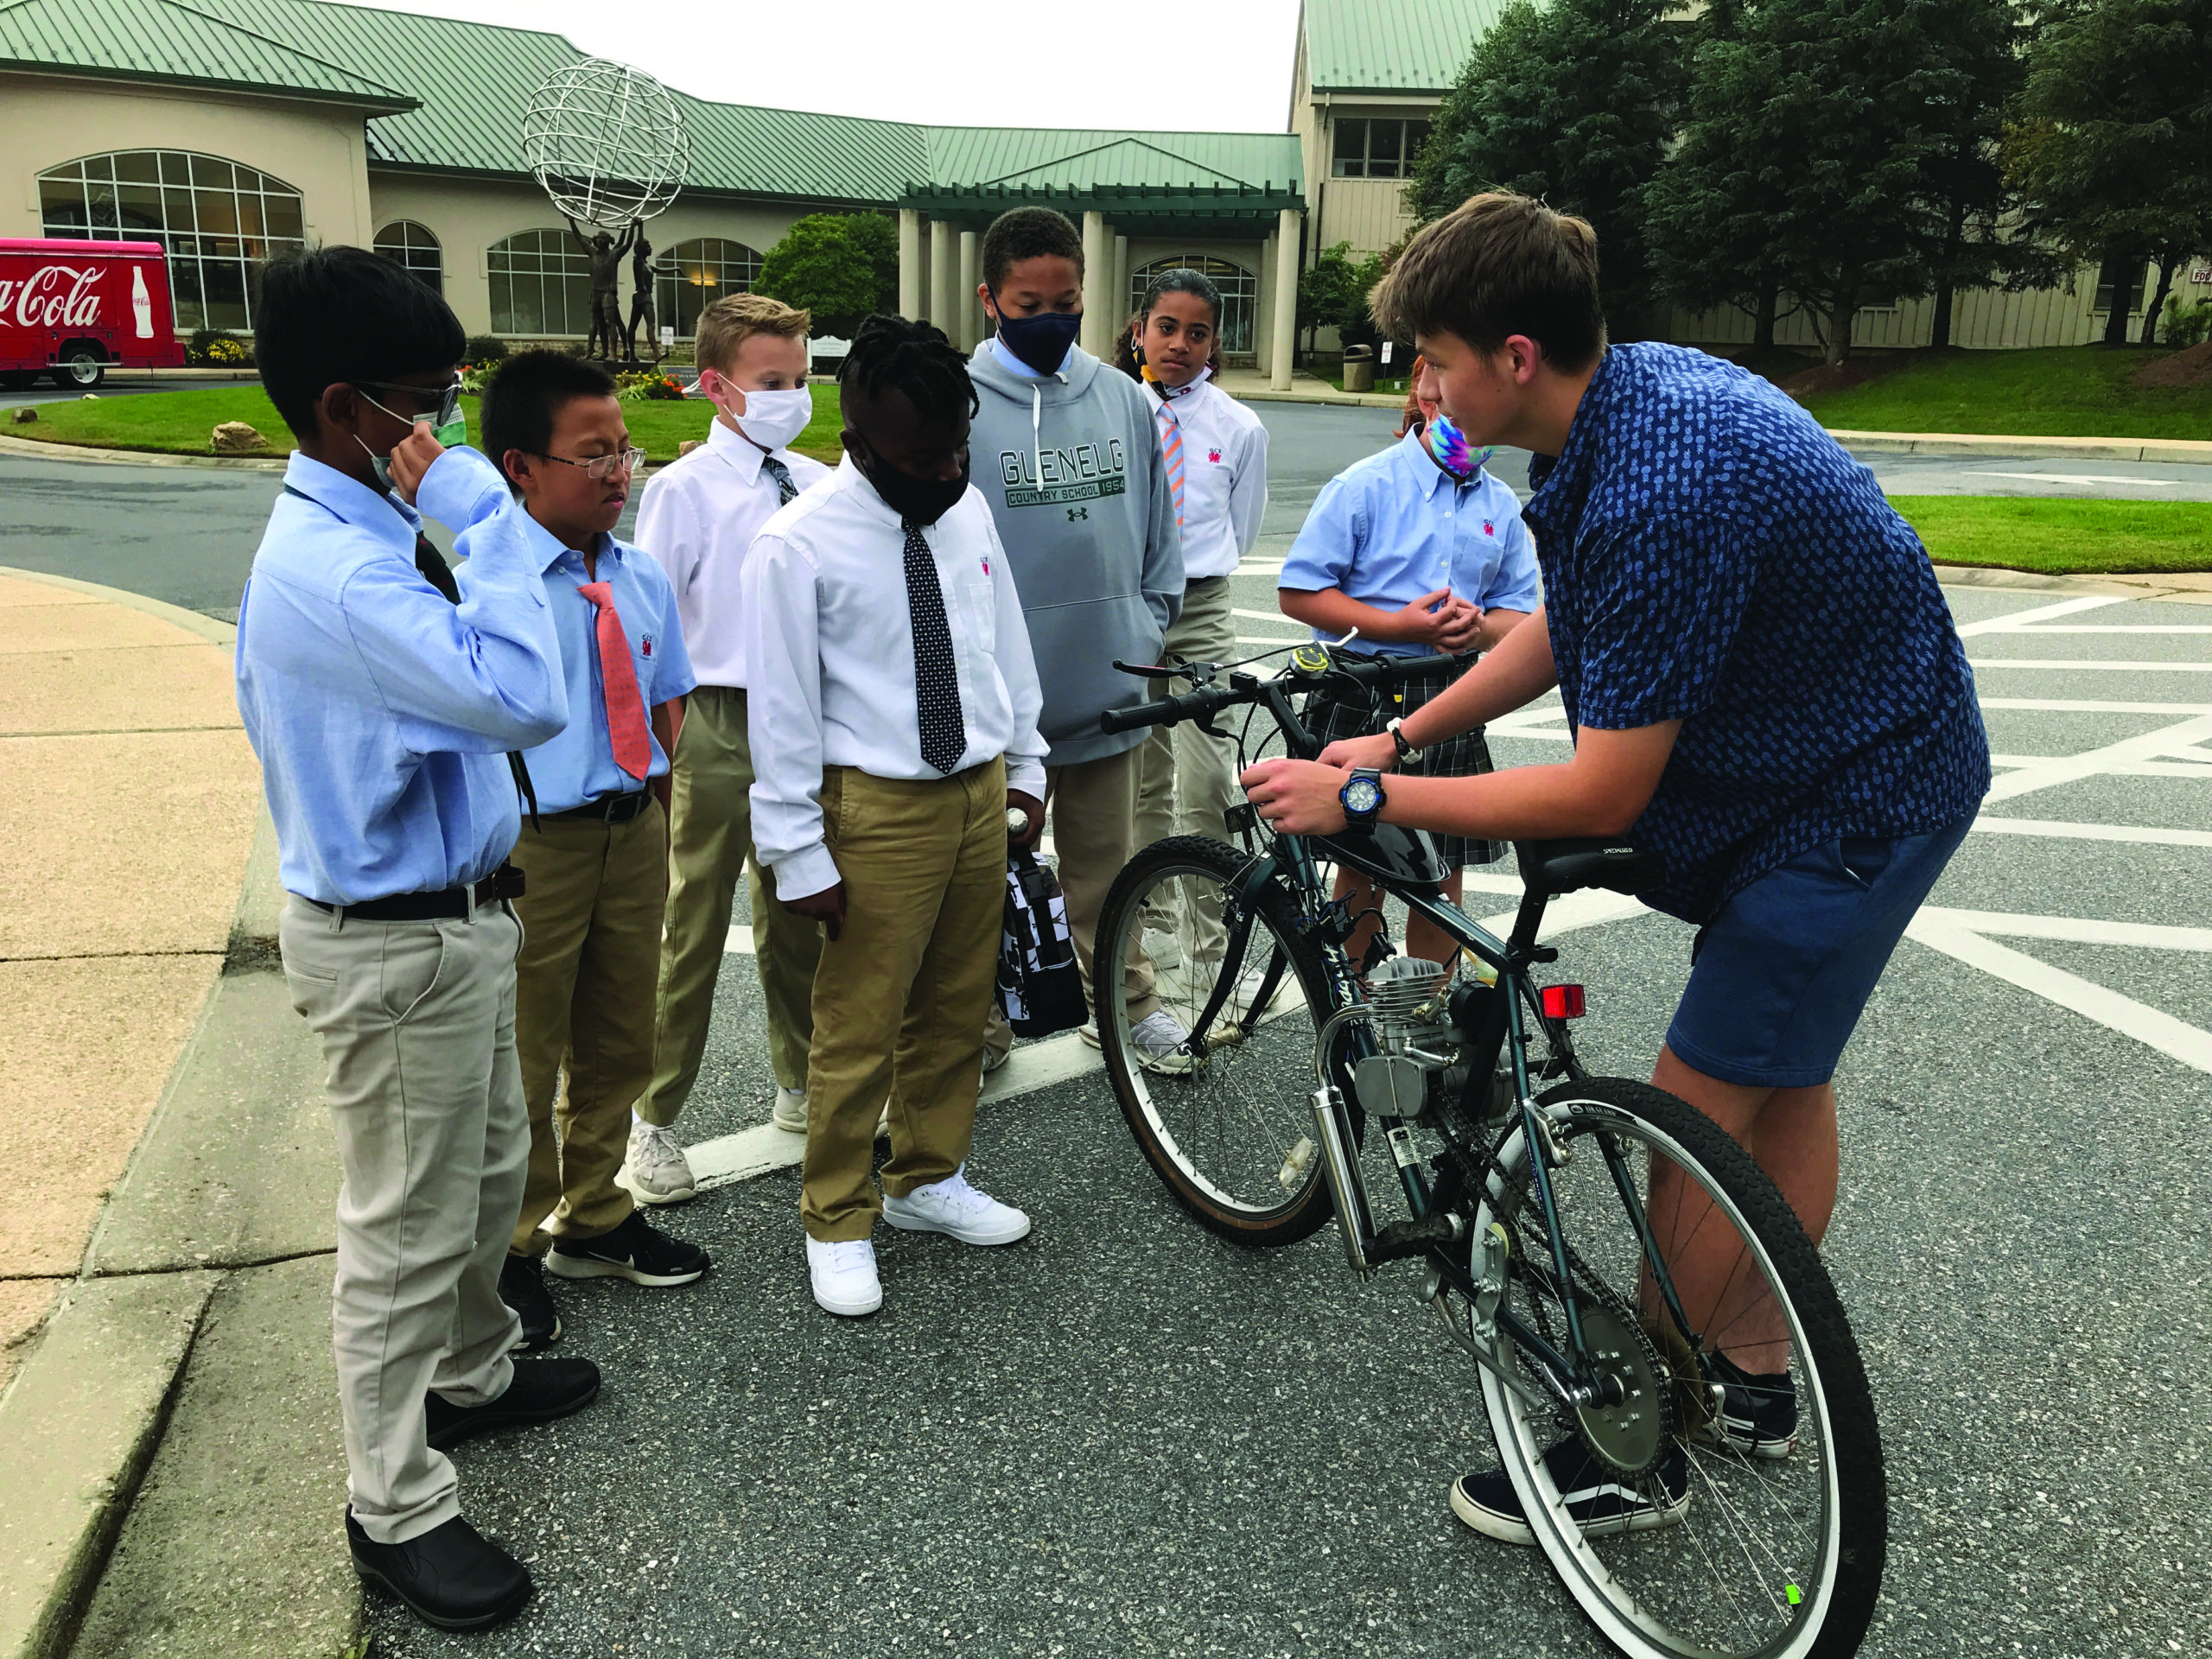 Josef Marschall shows his electronic bike to a group of Middle School students.